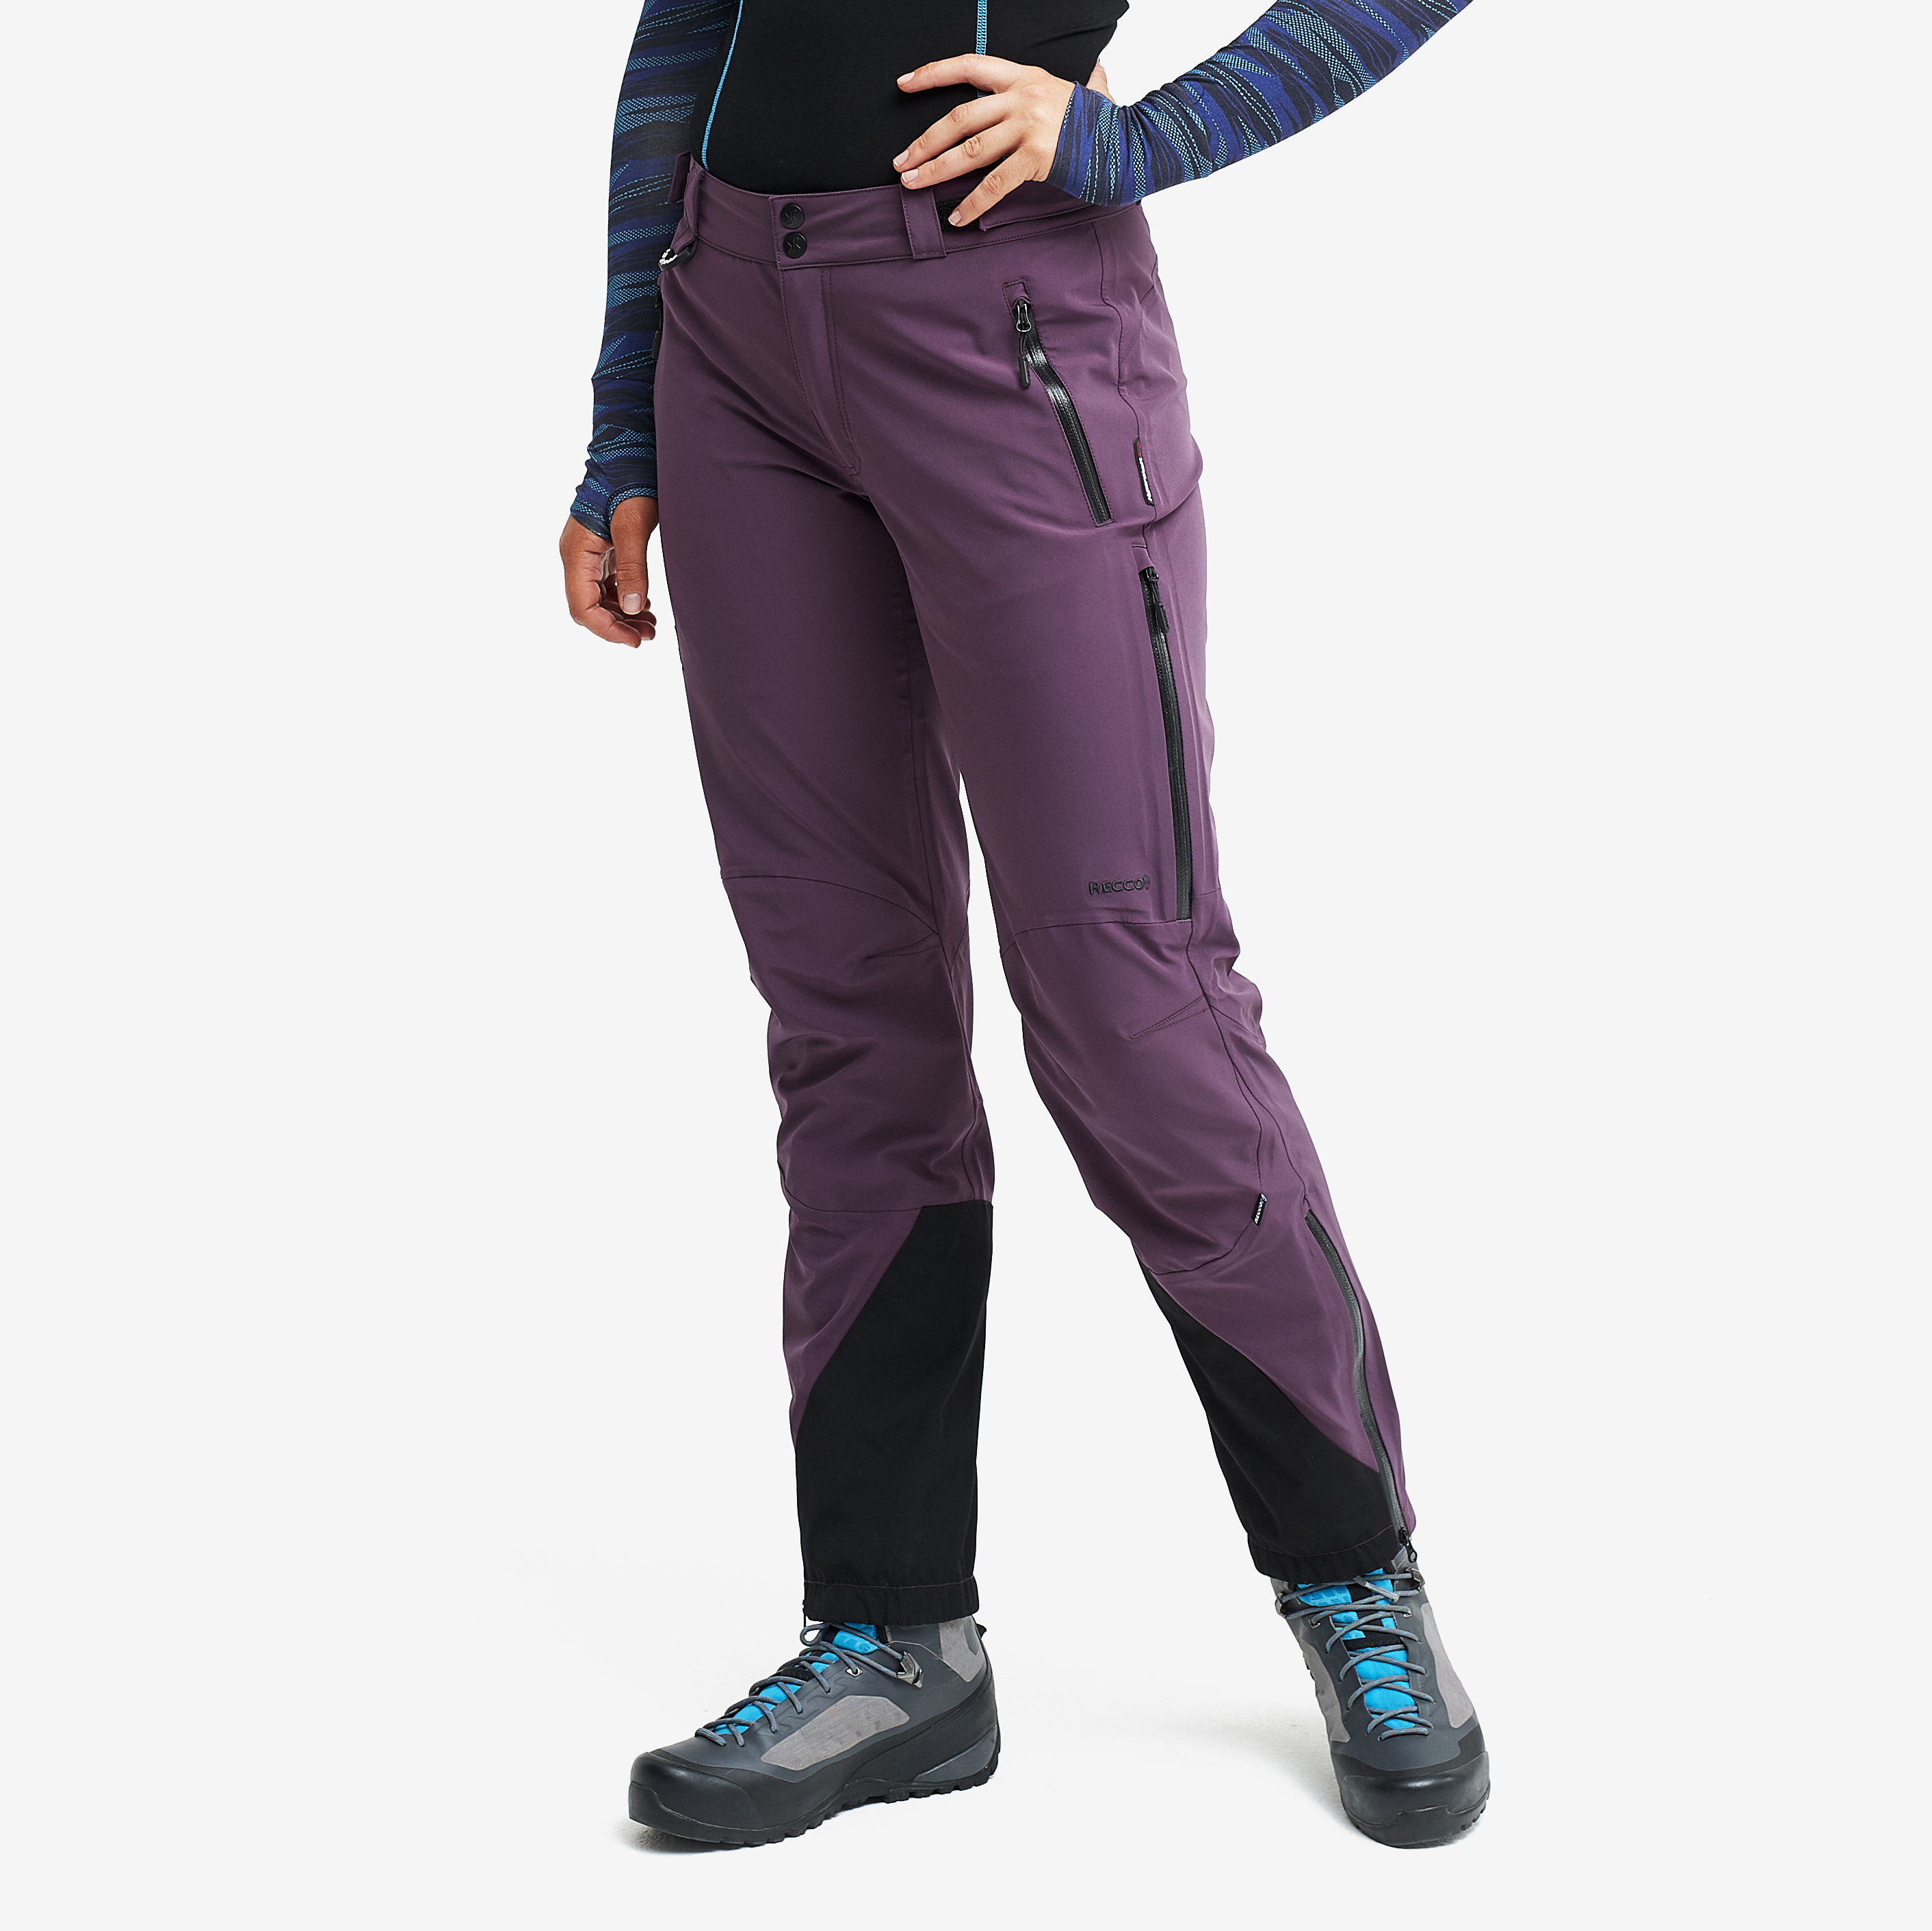 Cyclone Rescue Pants Blackberry Femme